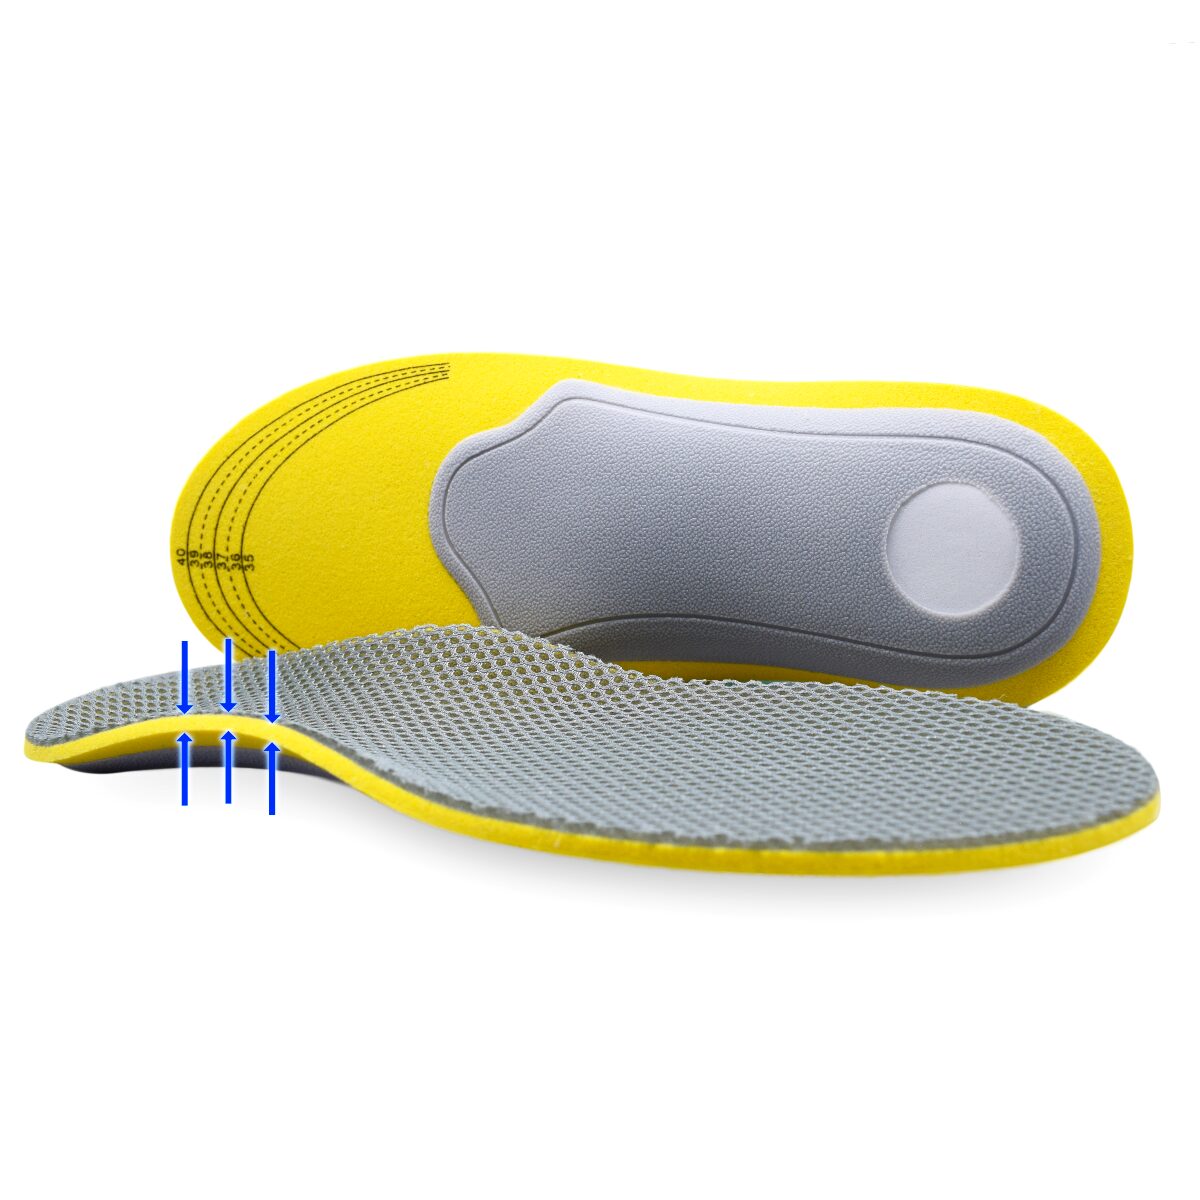 Orthotic Arch support insoles for Plantar Fasciitis, flat feet and high arches